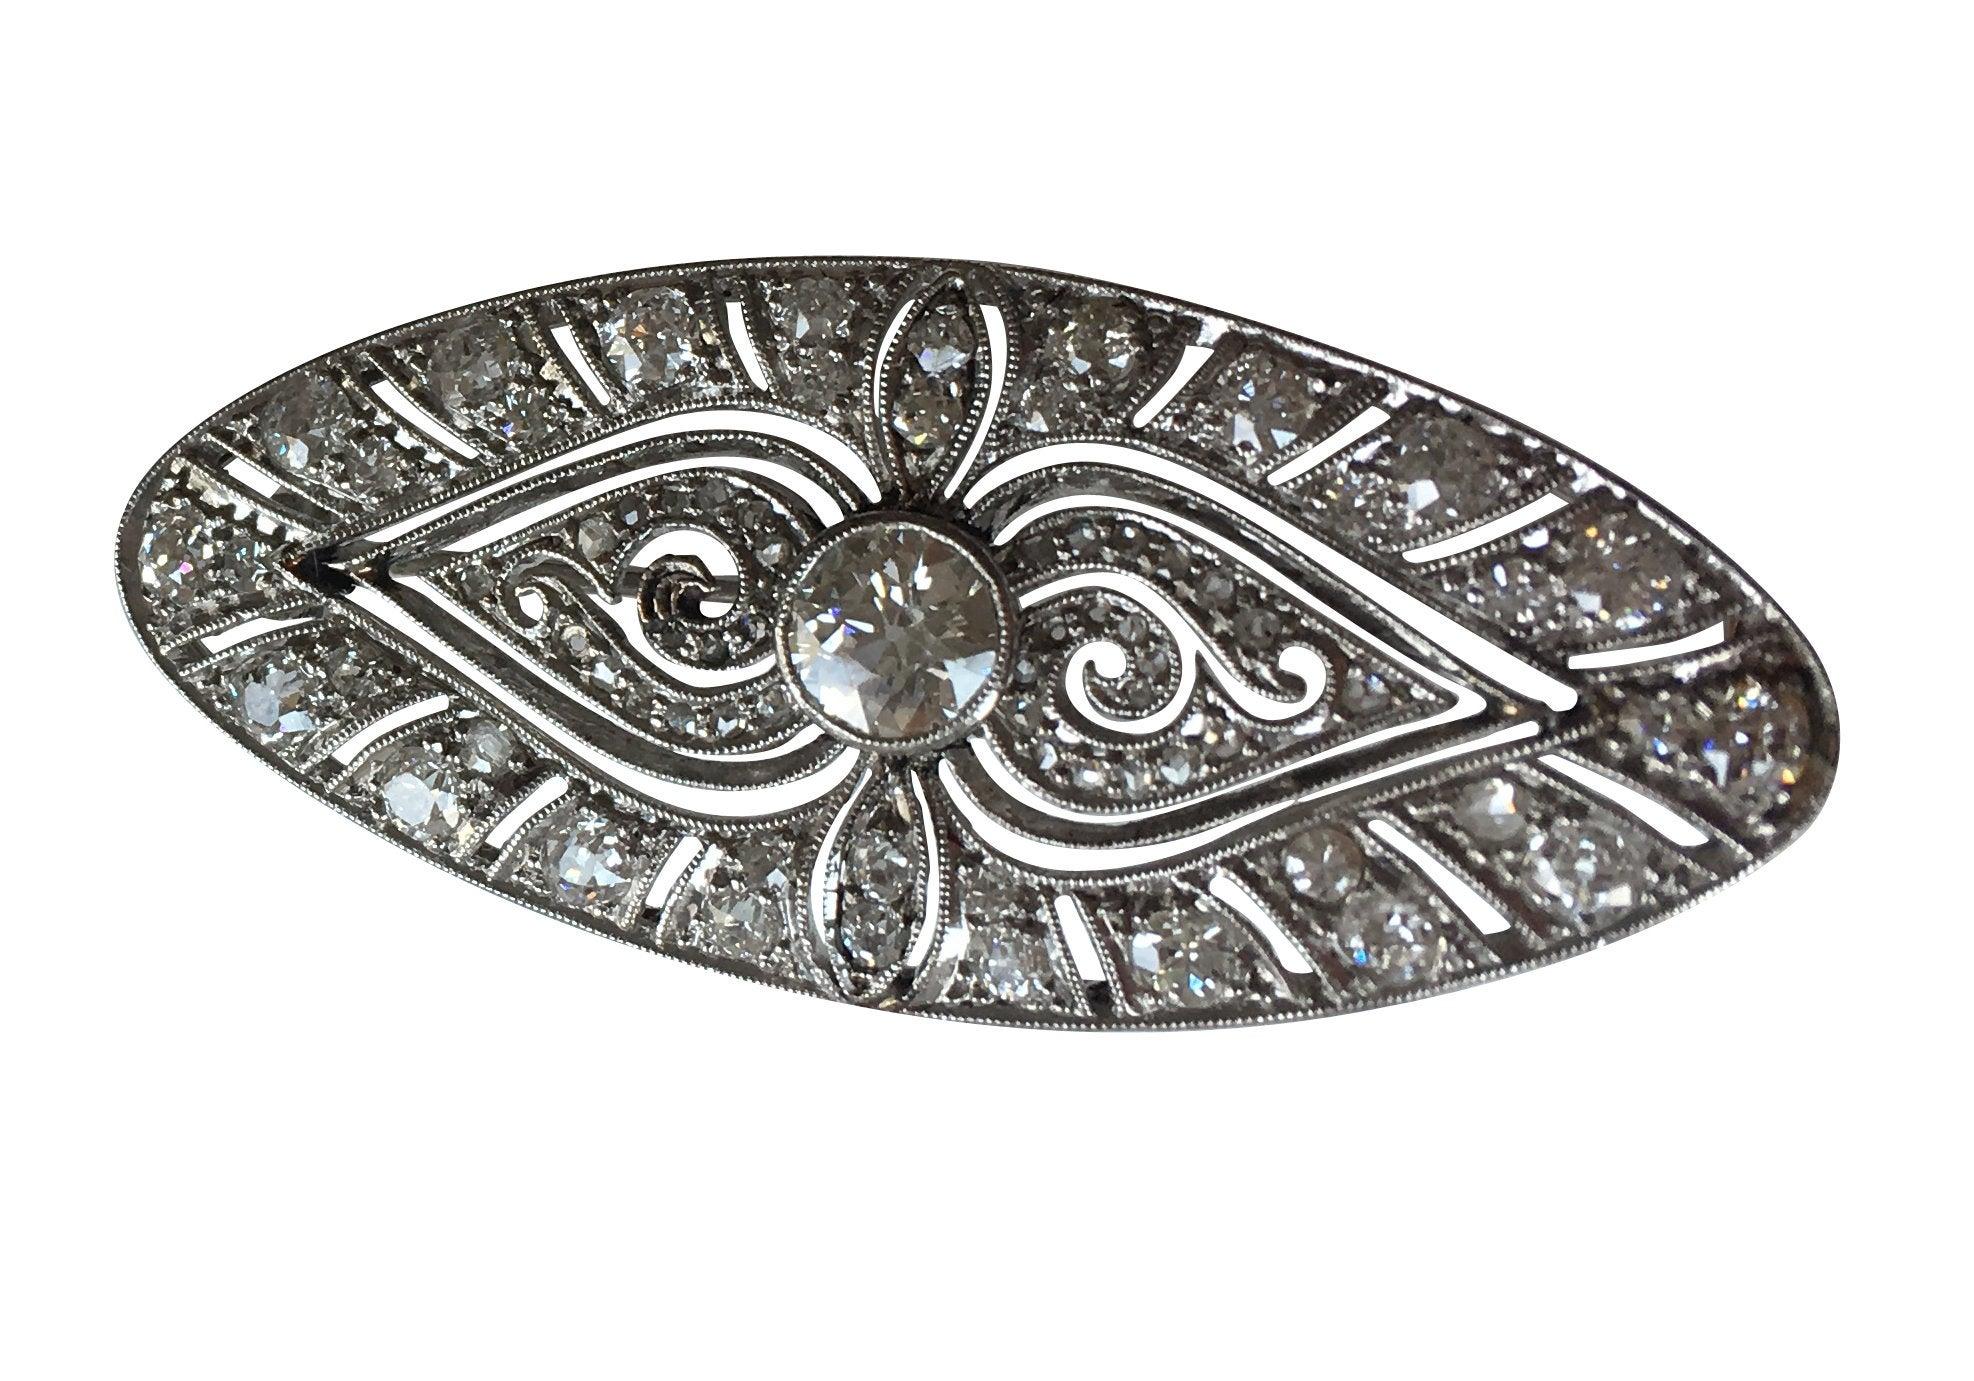 An early 20th century oval diamond set panel with open pierced work finish. At the centre of the panel a brilliant cut diamond in a rub over setting. The diamond weighs .53ct Assessed F colour VS1. The brooch is grain set throughout with a further